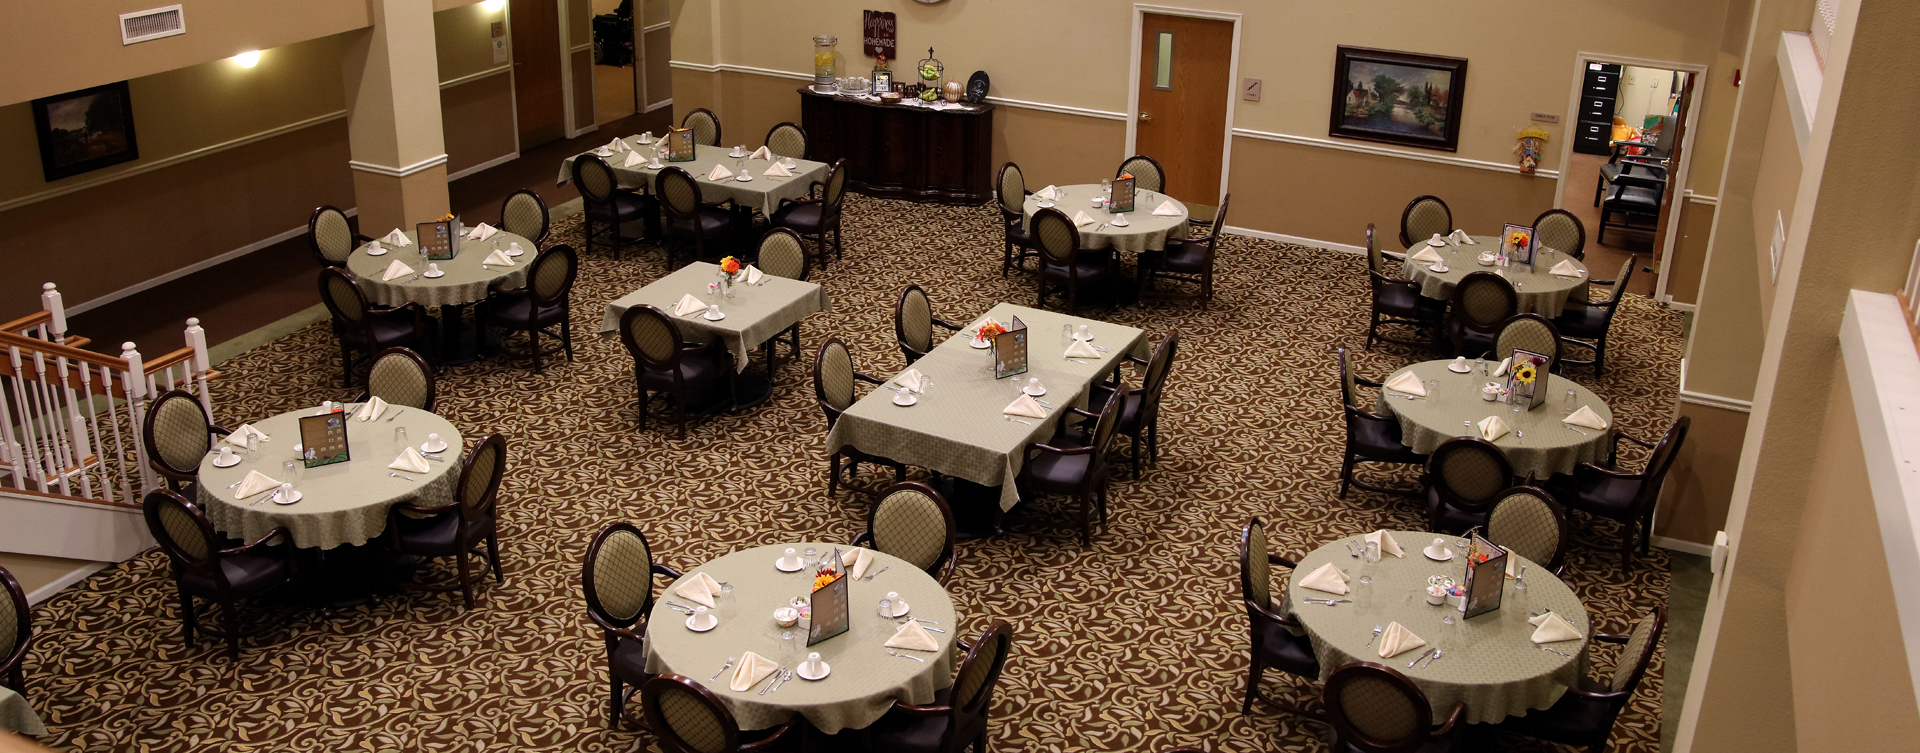 Food is best when shared with friends in the dining room at Bickford of Rockford